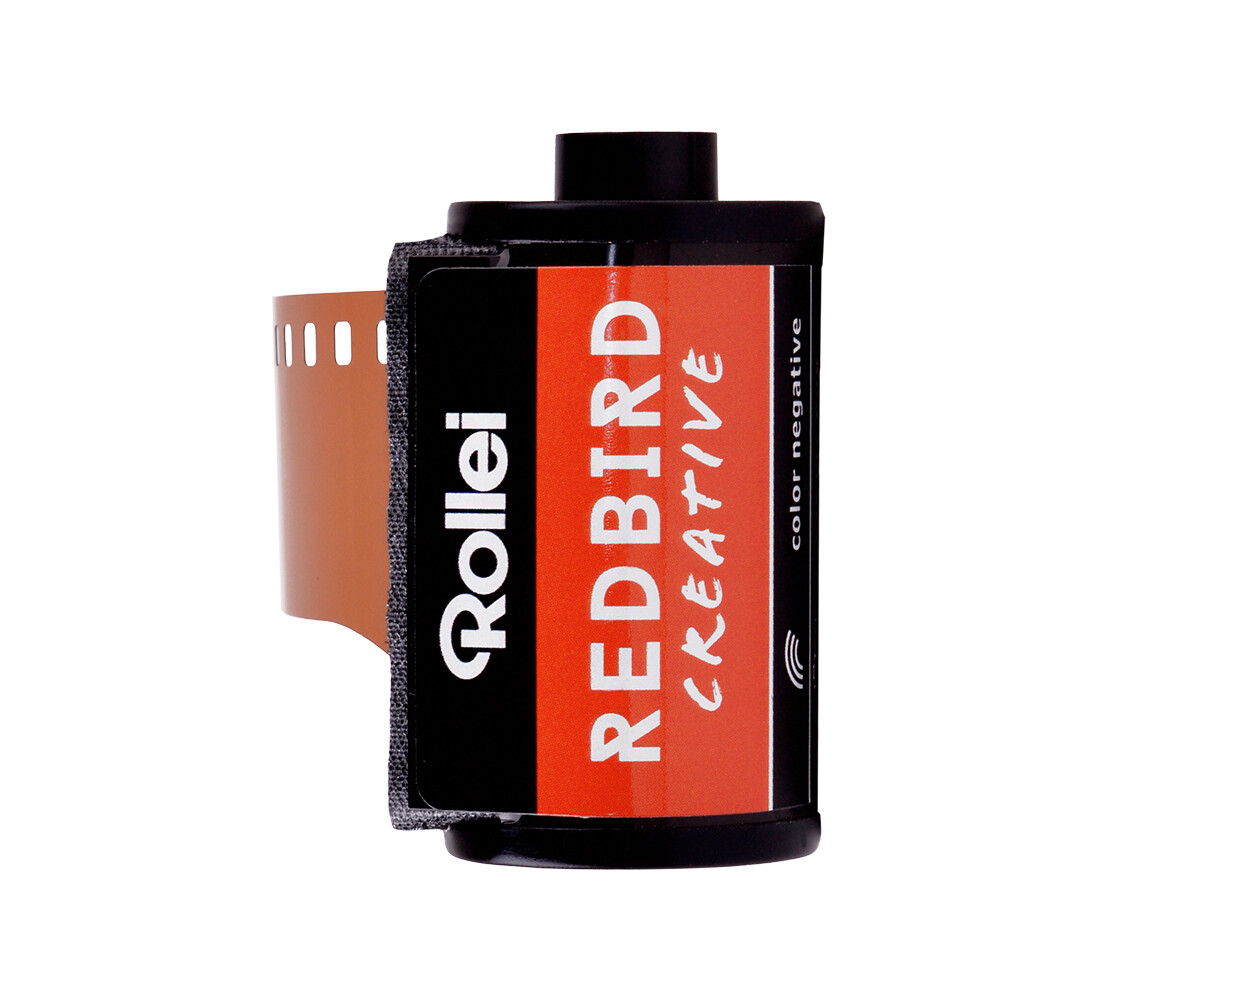 Rollei Redbird 35mm 36 exposures redscale film - pre-order now (available from approx. 07.04.2021)